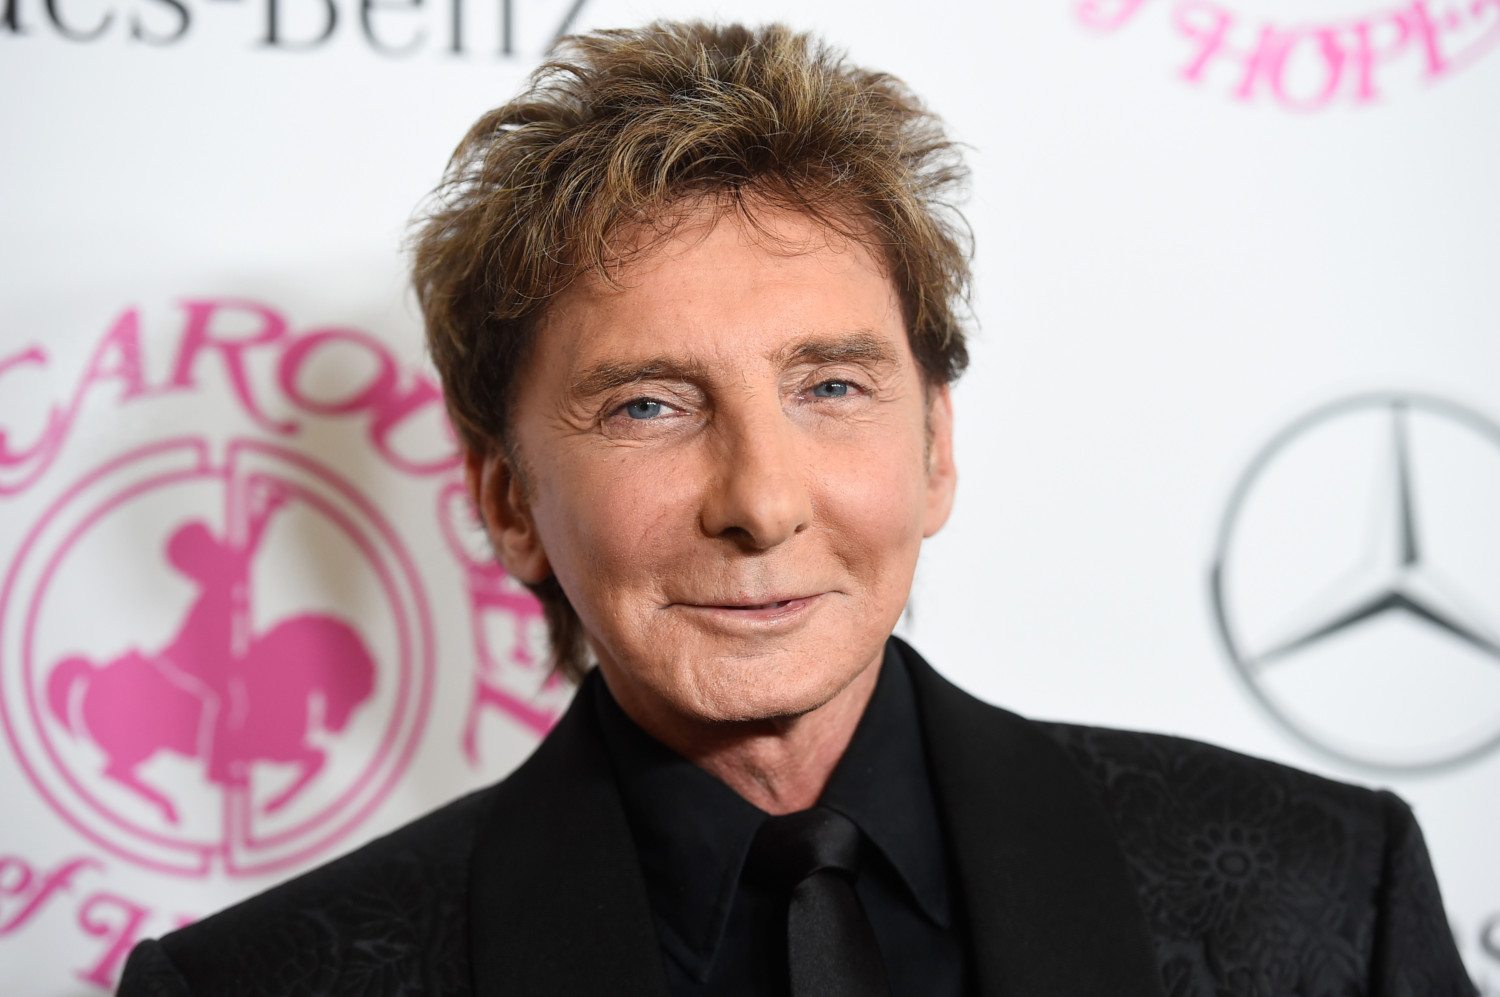 barry manilow - photo #19